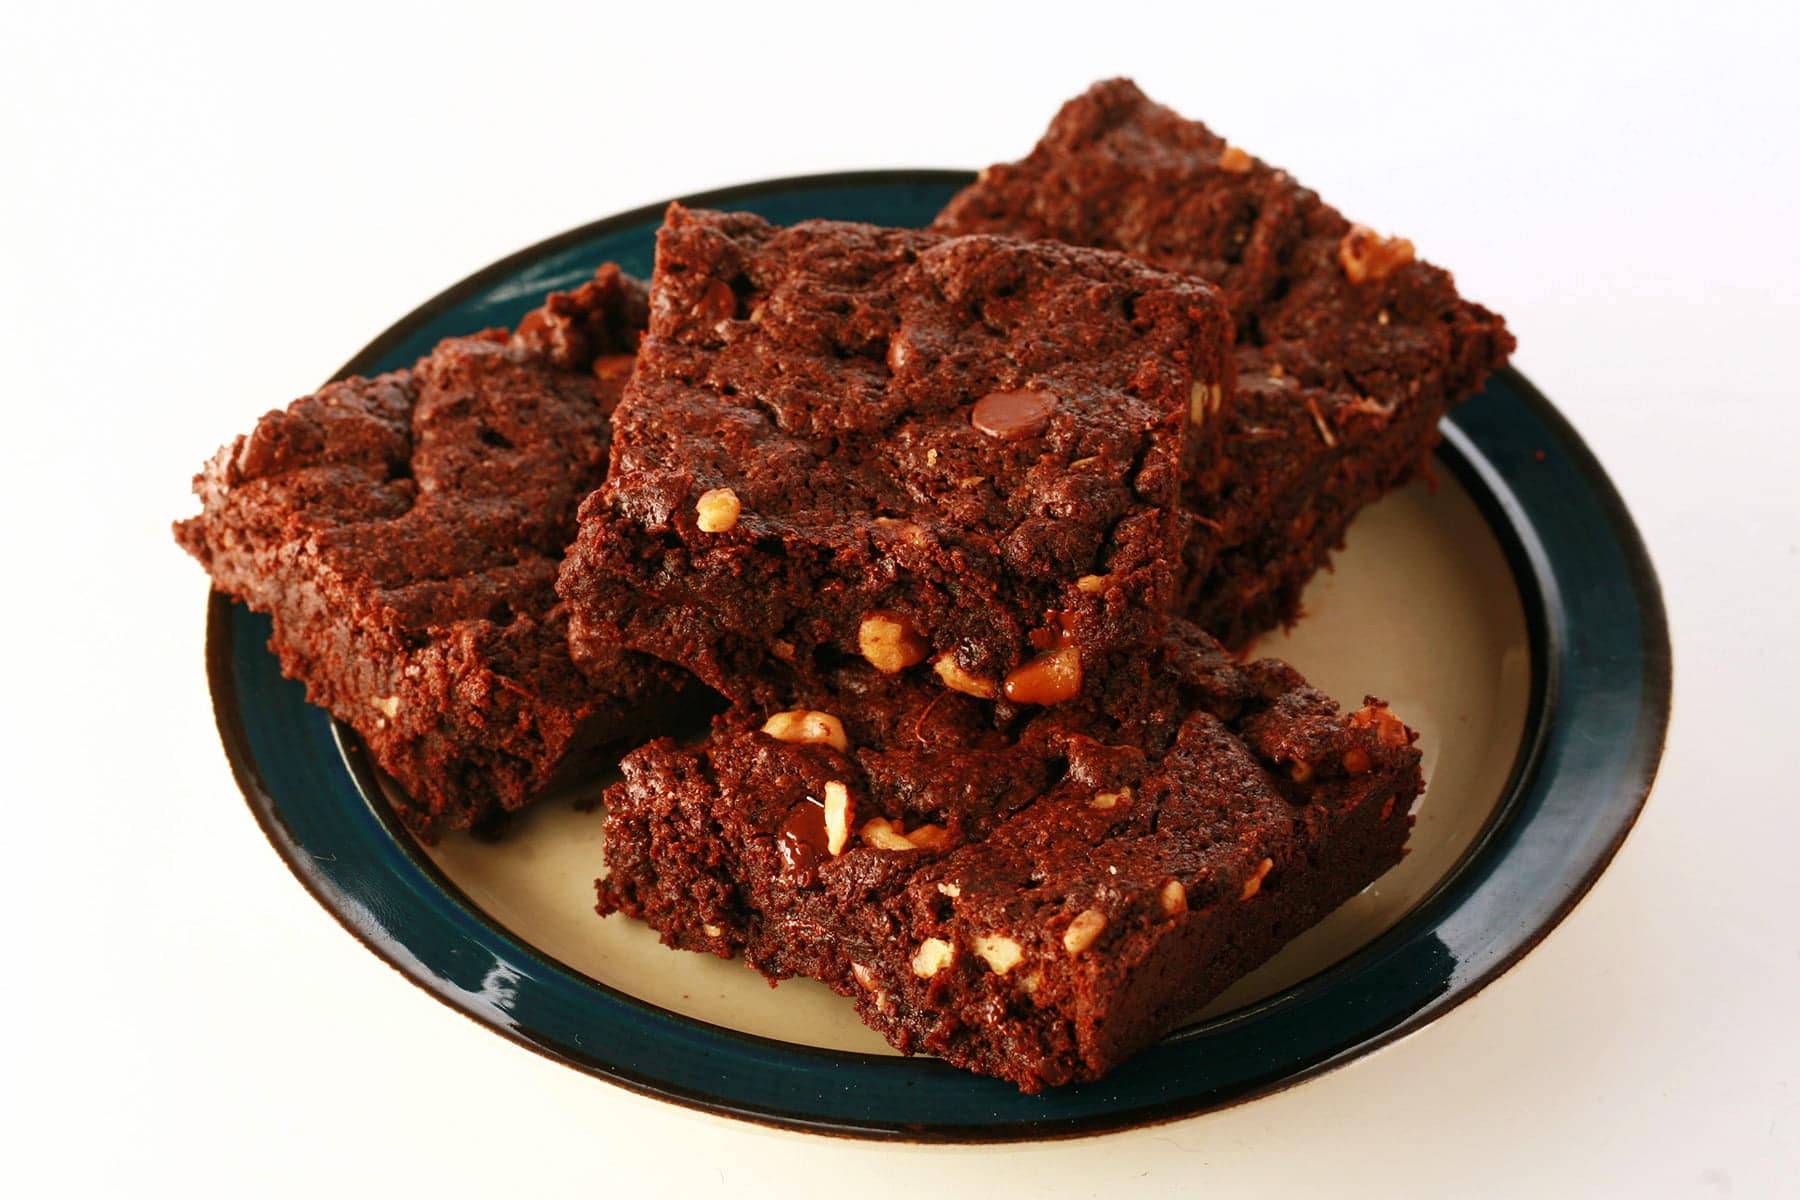 A small plate, piled with 4 double chocolate walnut brownies.